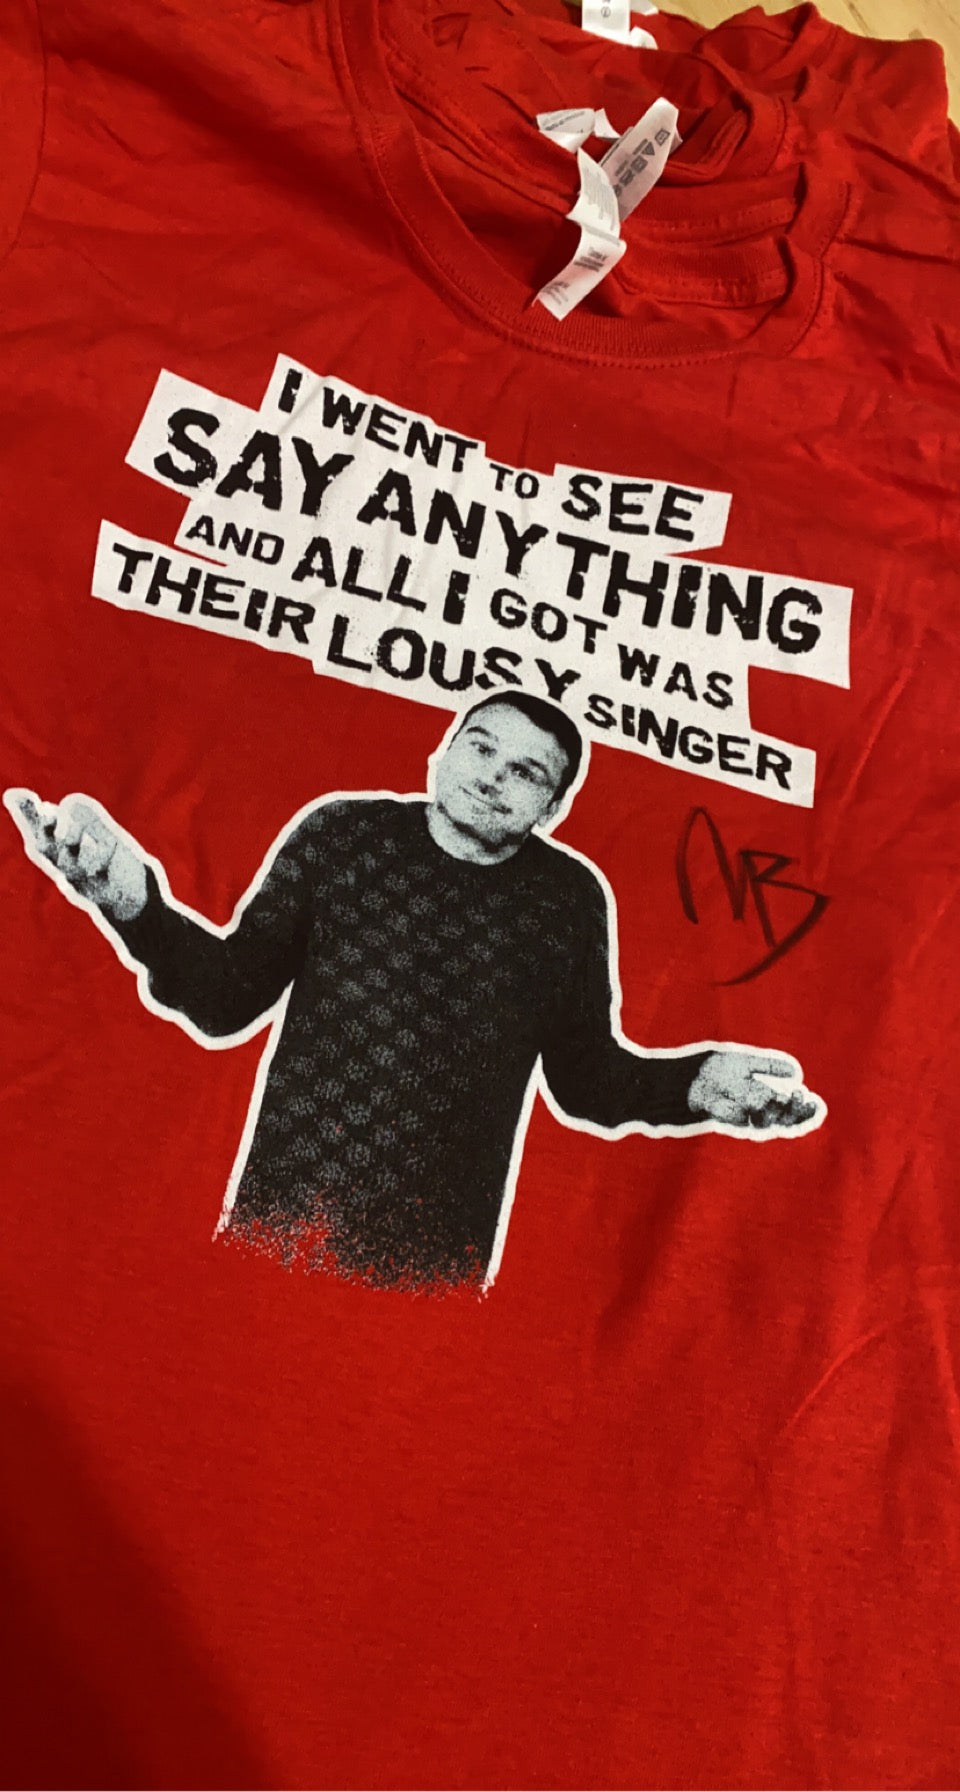 Signed Say Anything Lousy Singer Tshirt